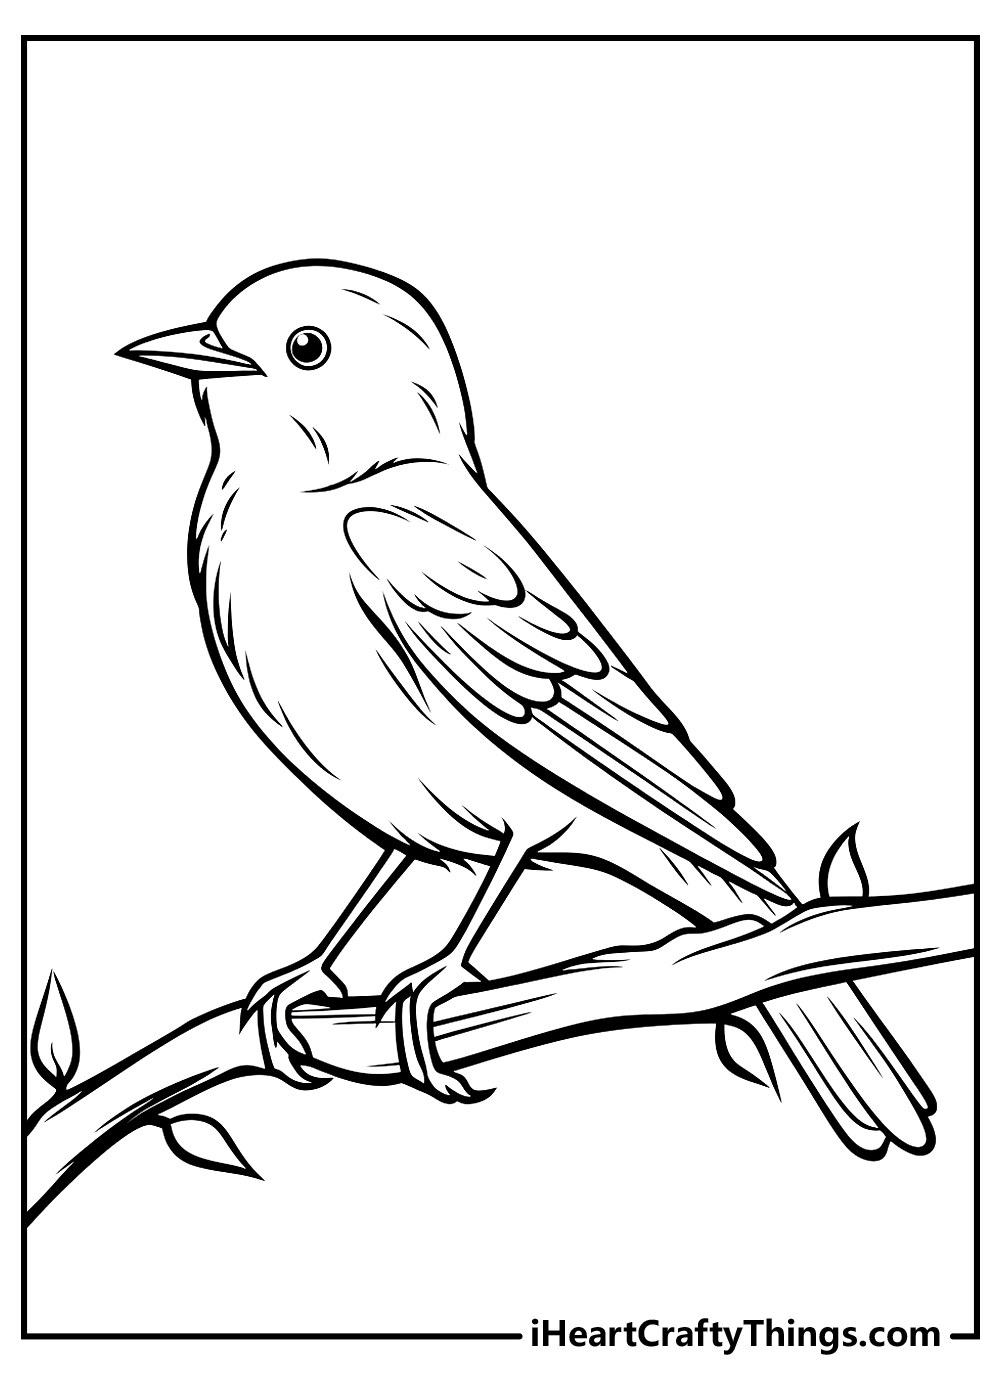 Bird coloring pages free printables